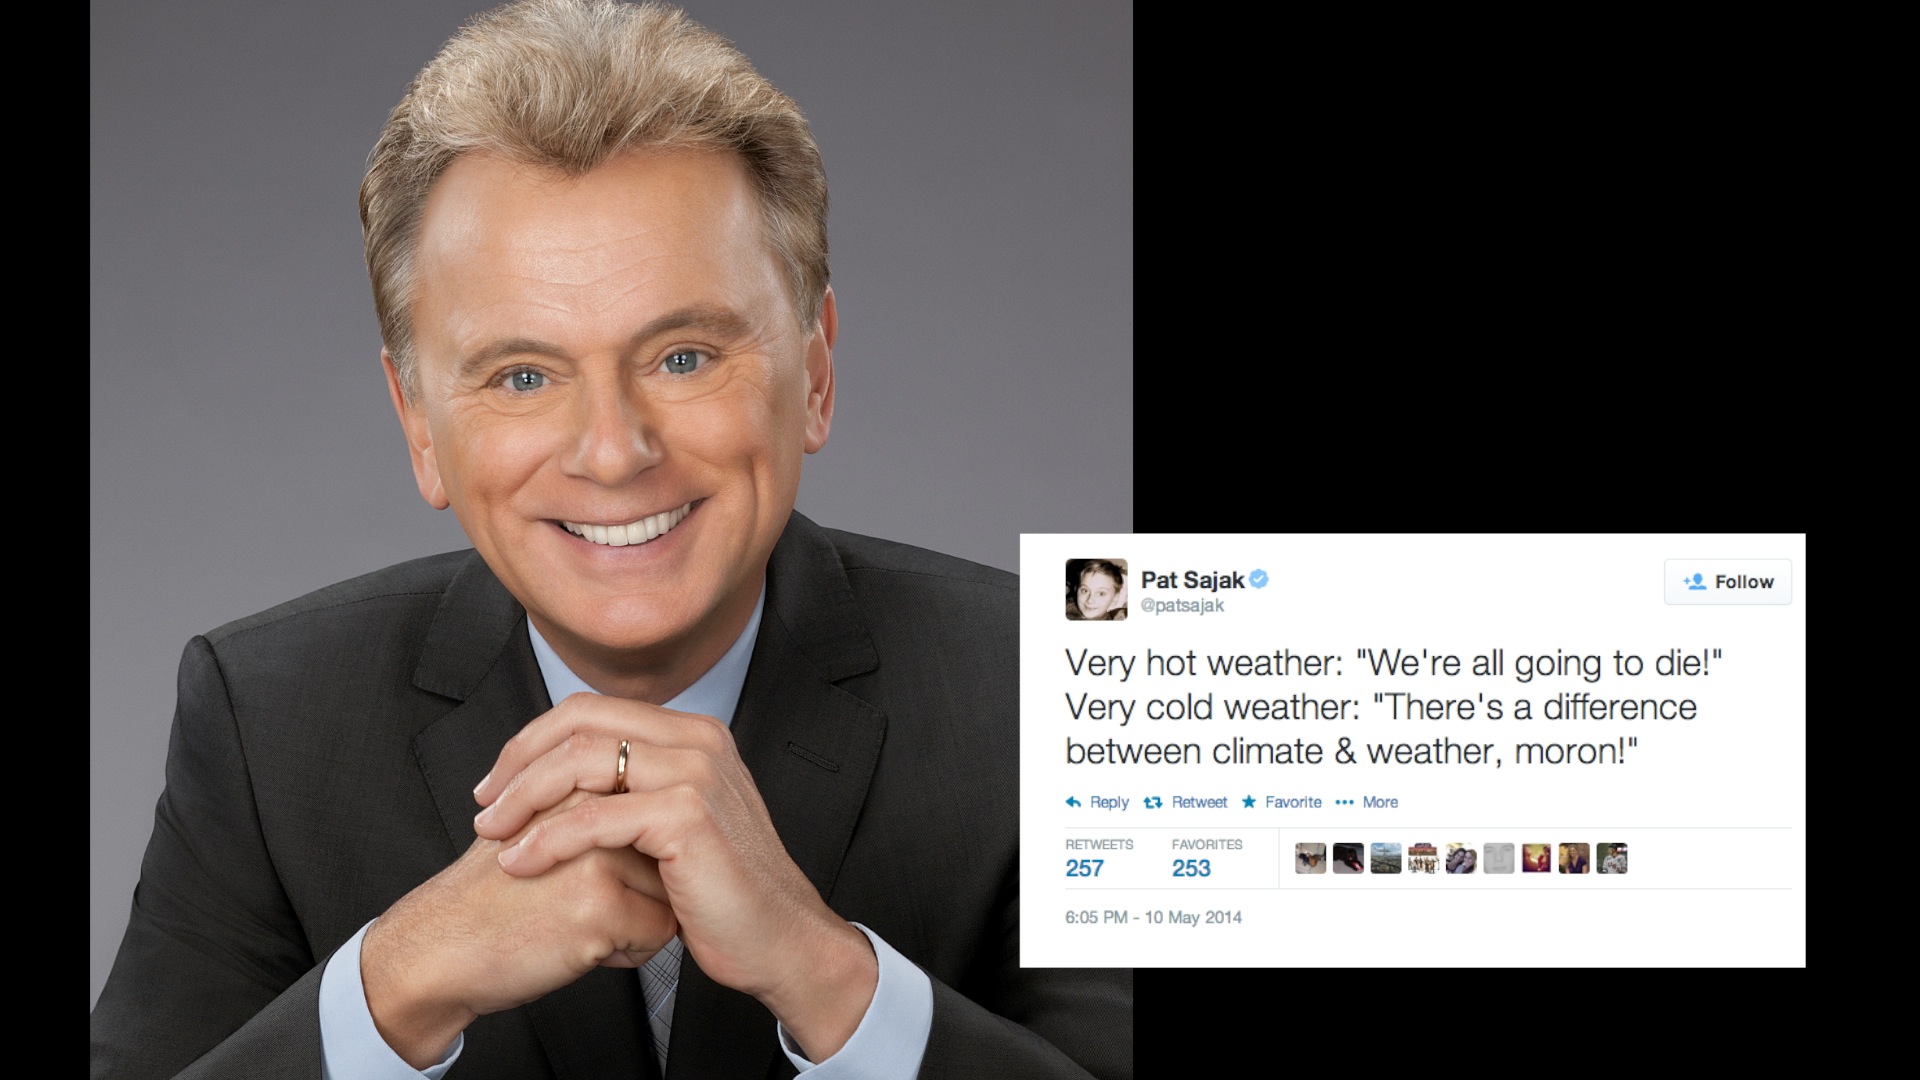 Pat Sajak spins climate change on Twitter - The Washington Post